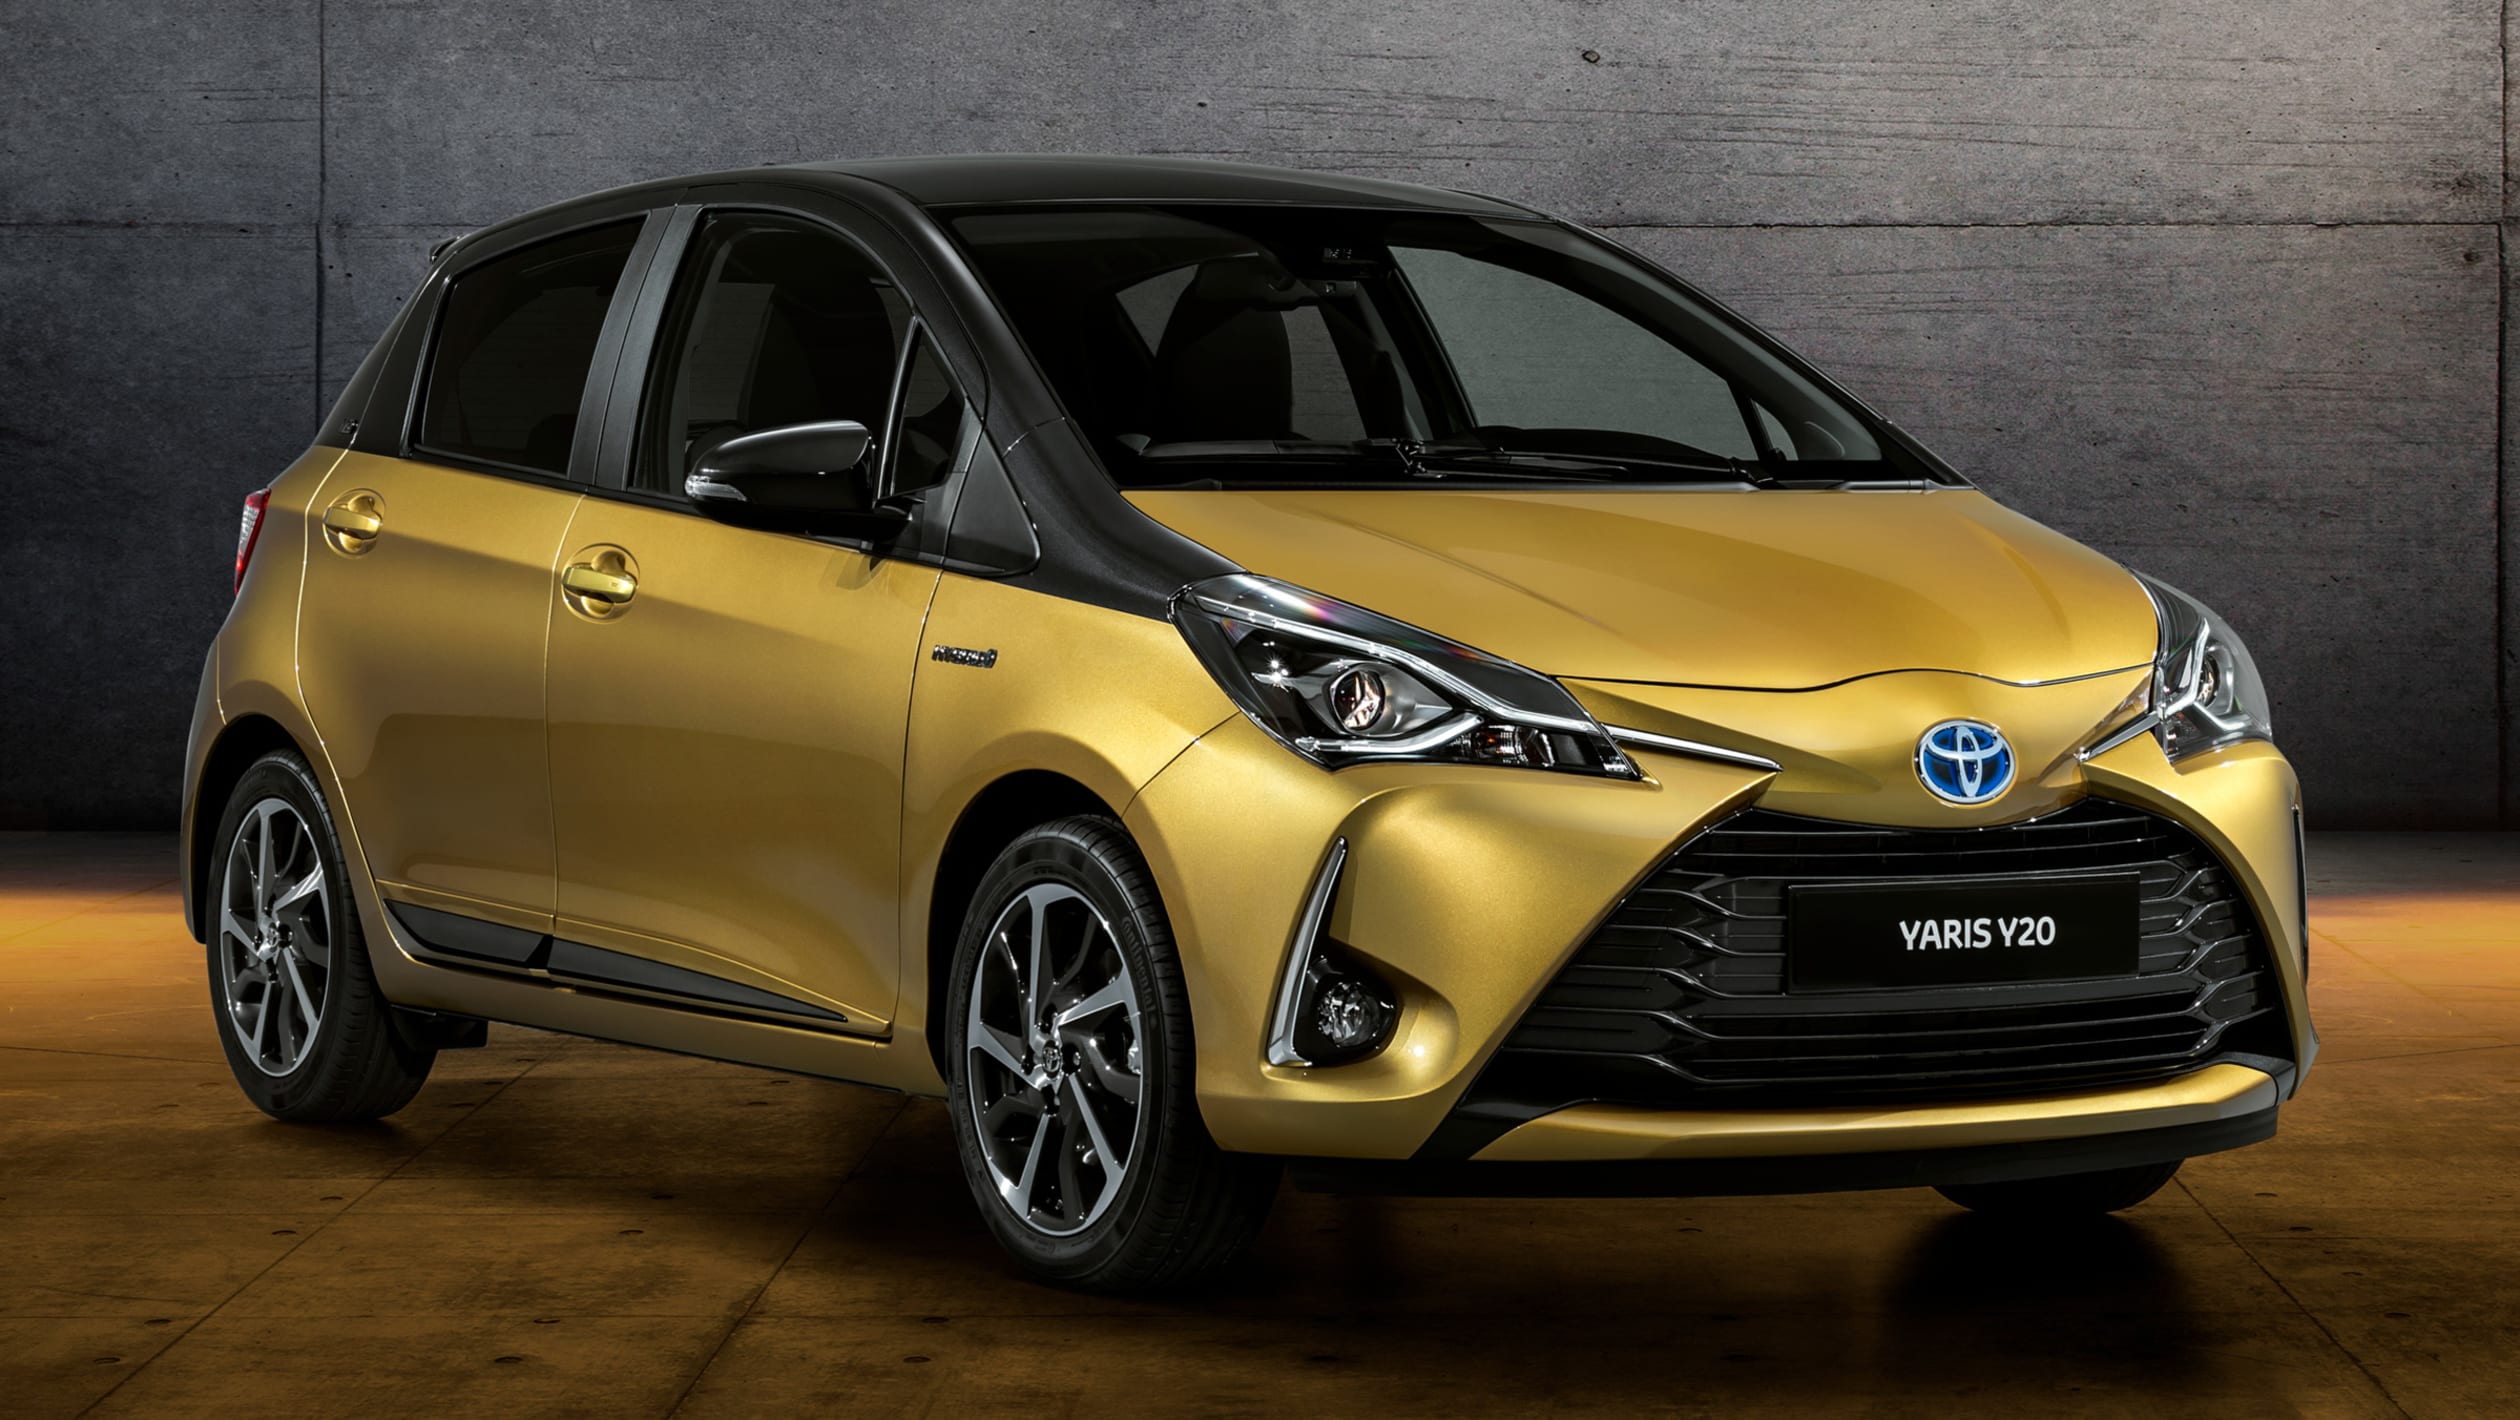 Toyota Yaris Y20 Launch Edition unveiled pictures Auto